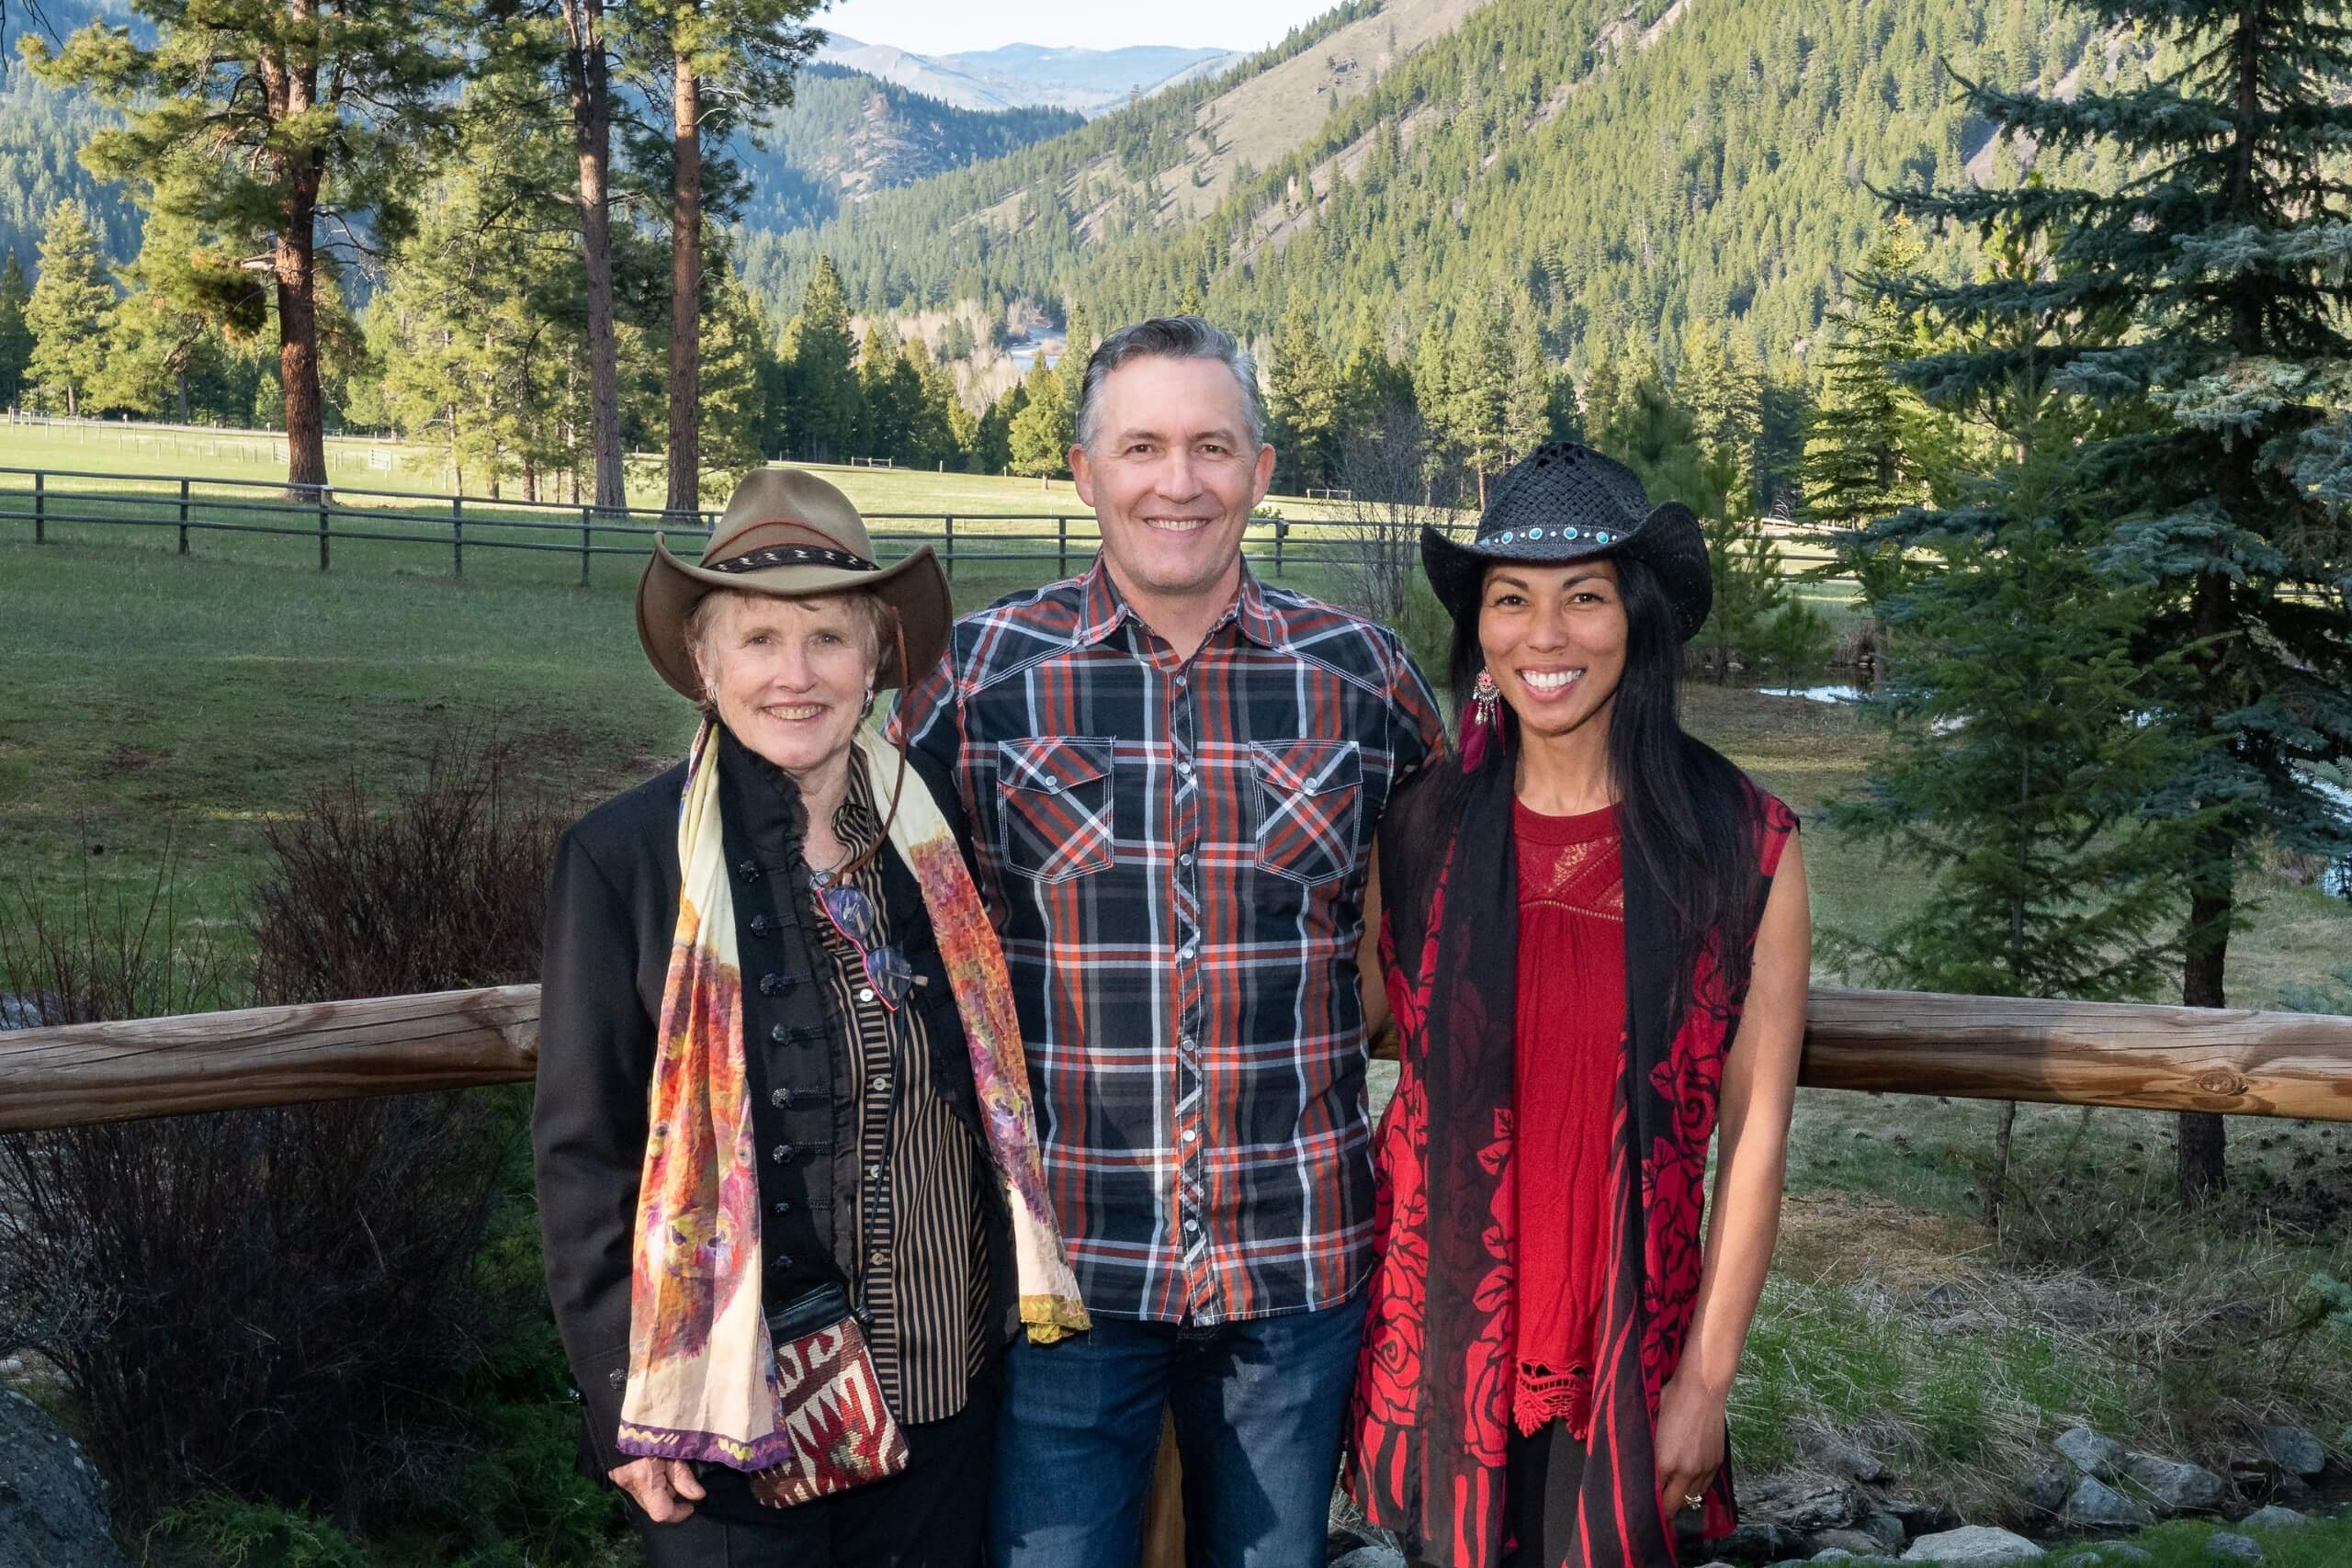 Artist Workshop Artists Nancy Cawdrey, Jason Rich, and Brenna Kimbro standing in front of mountain landscape.